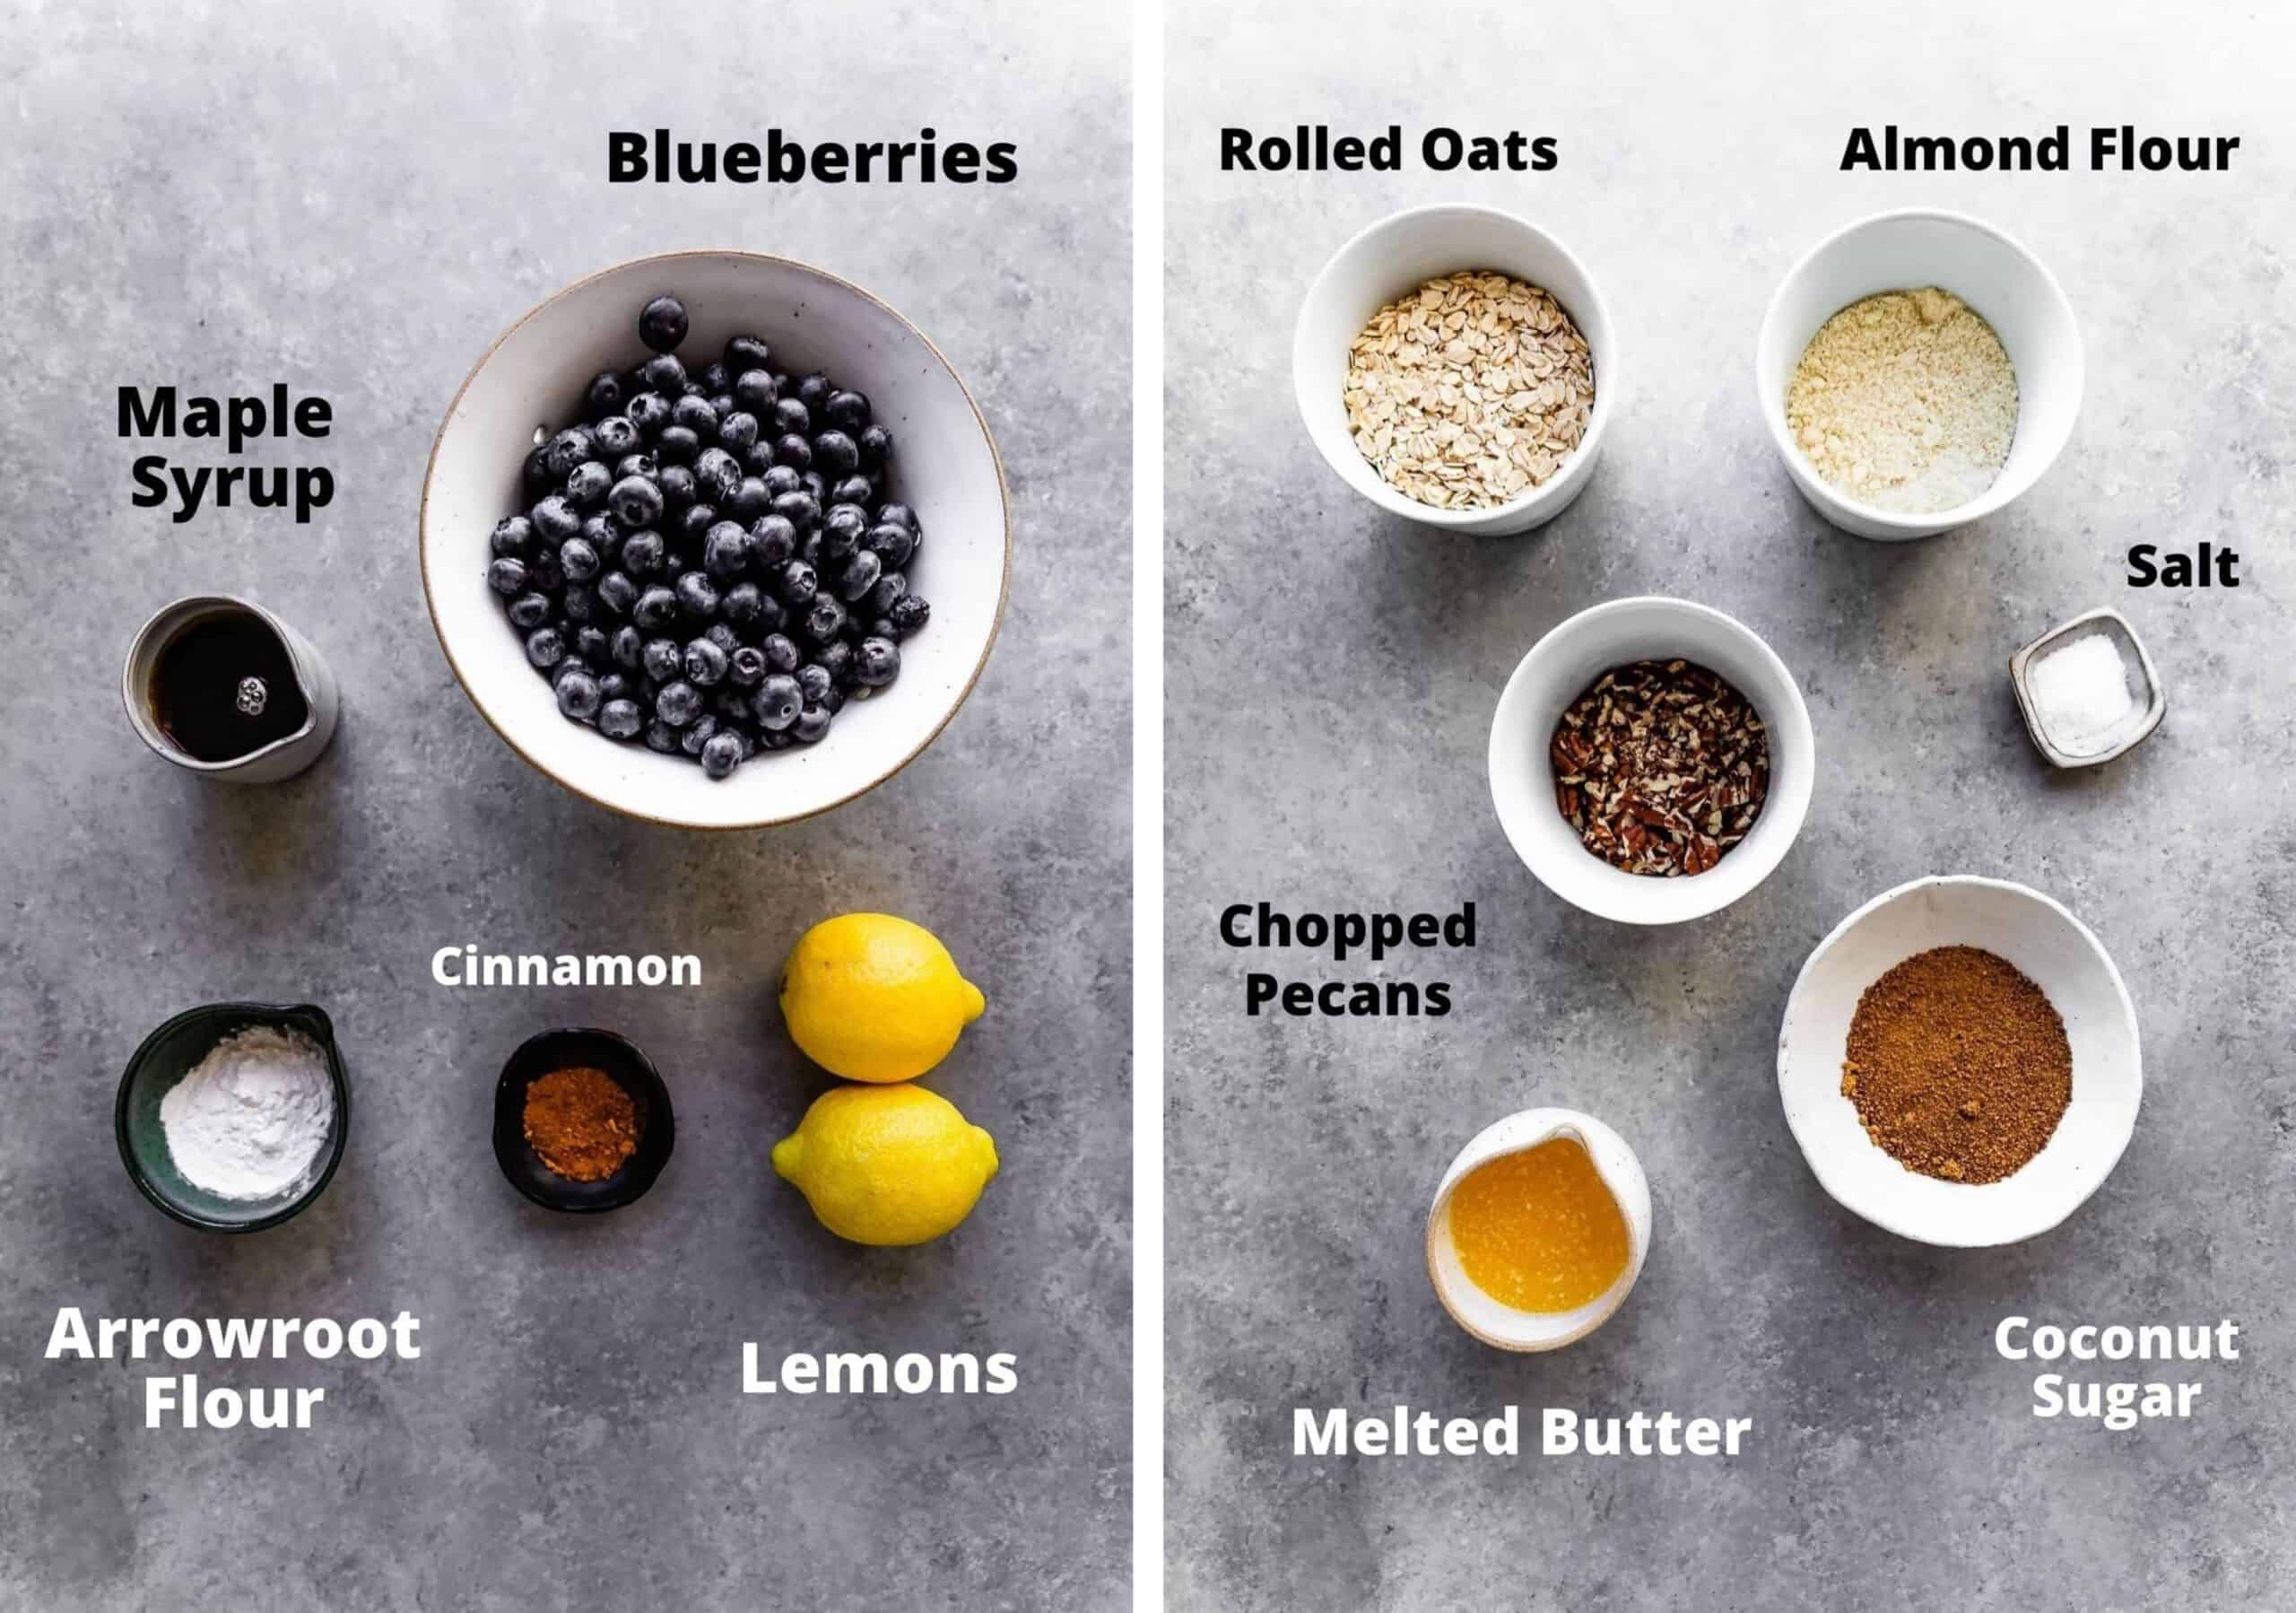 ingredients laid out to make gluten free blueberry crisp on a grey board: blueberries, maple syrup, cinnamon, arrowroot flour, lemons, rolled oats, almond flour, salt, chopped pecans, melted butter, coconut sugar